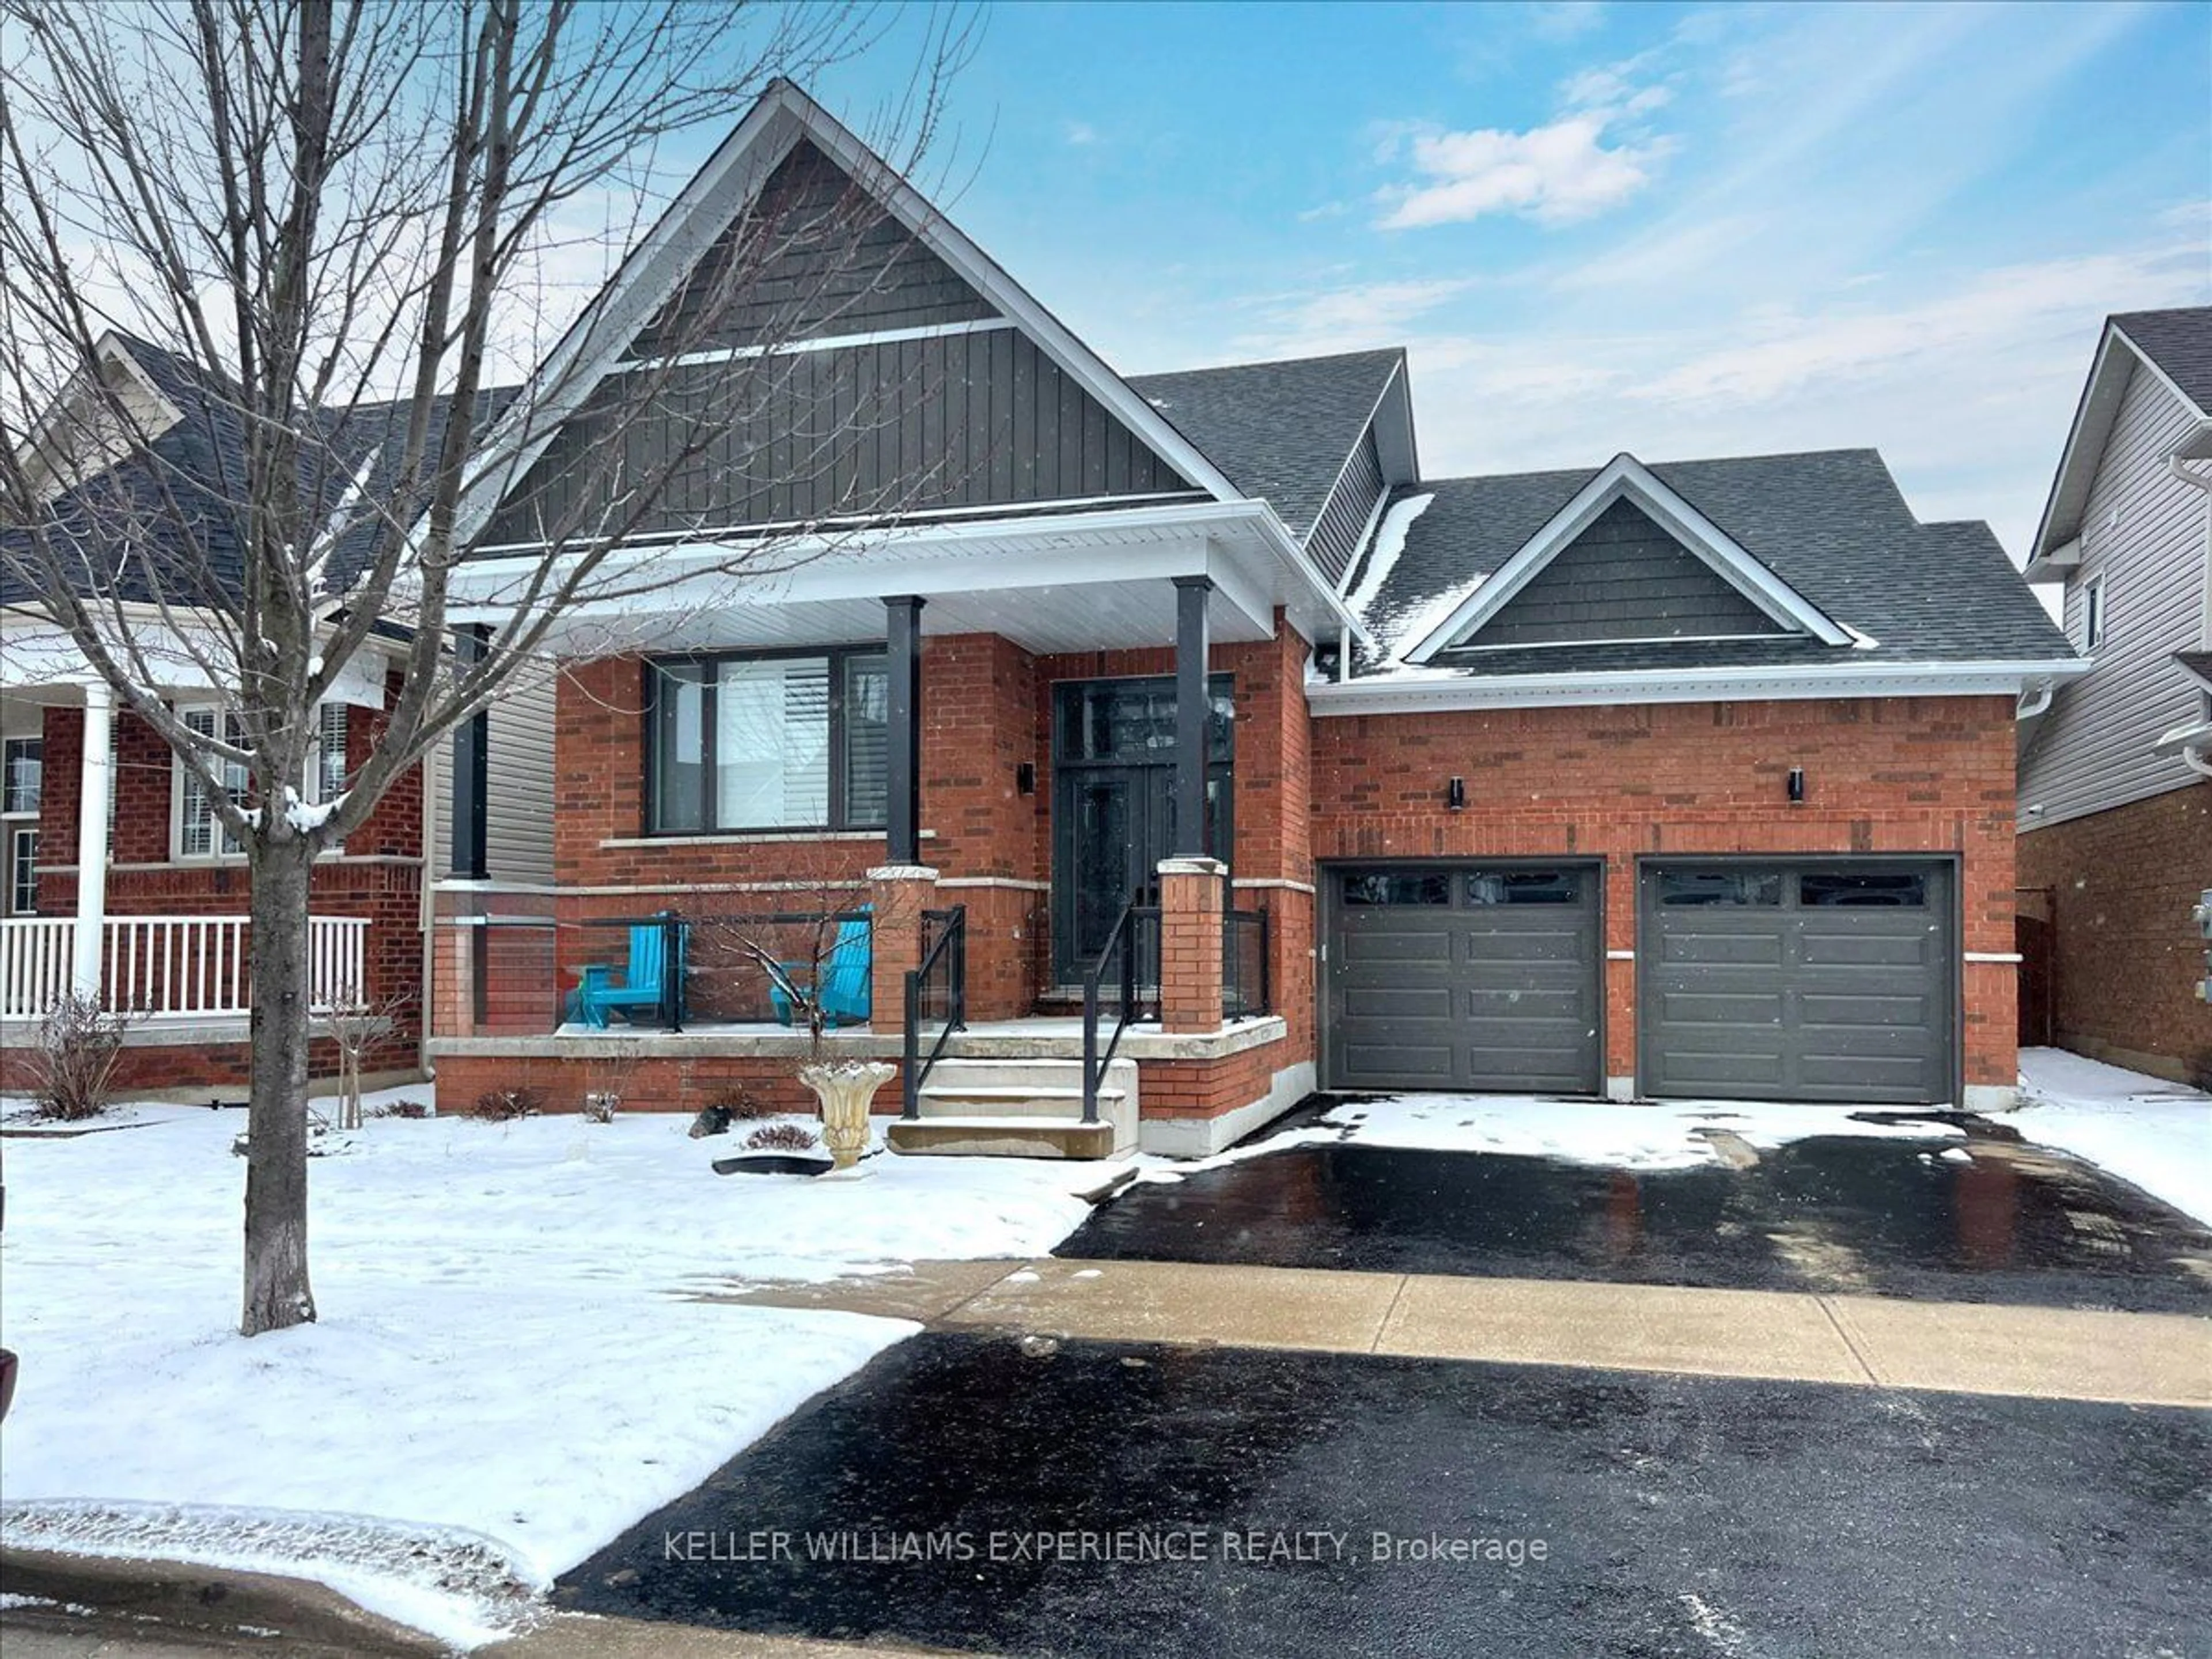 Home with brick exterior material for 27 Counsellor Terr, Barrie Ontario L4M 7H1